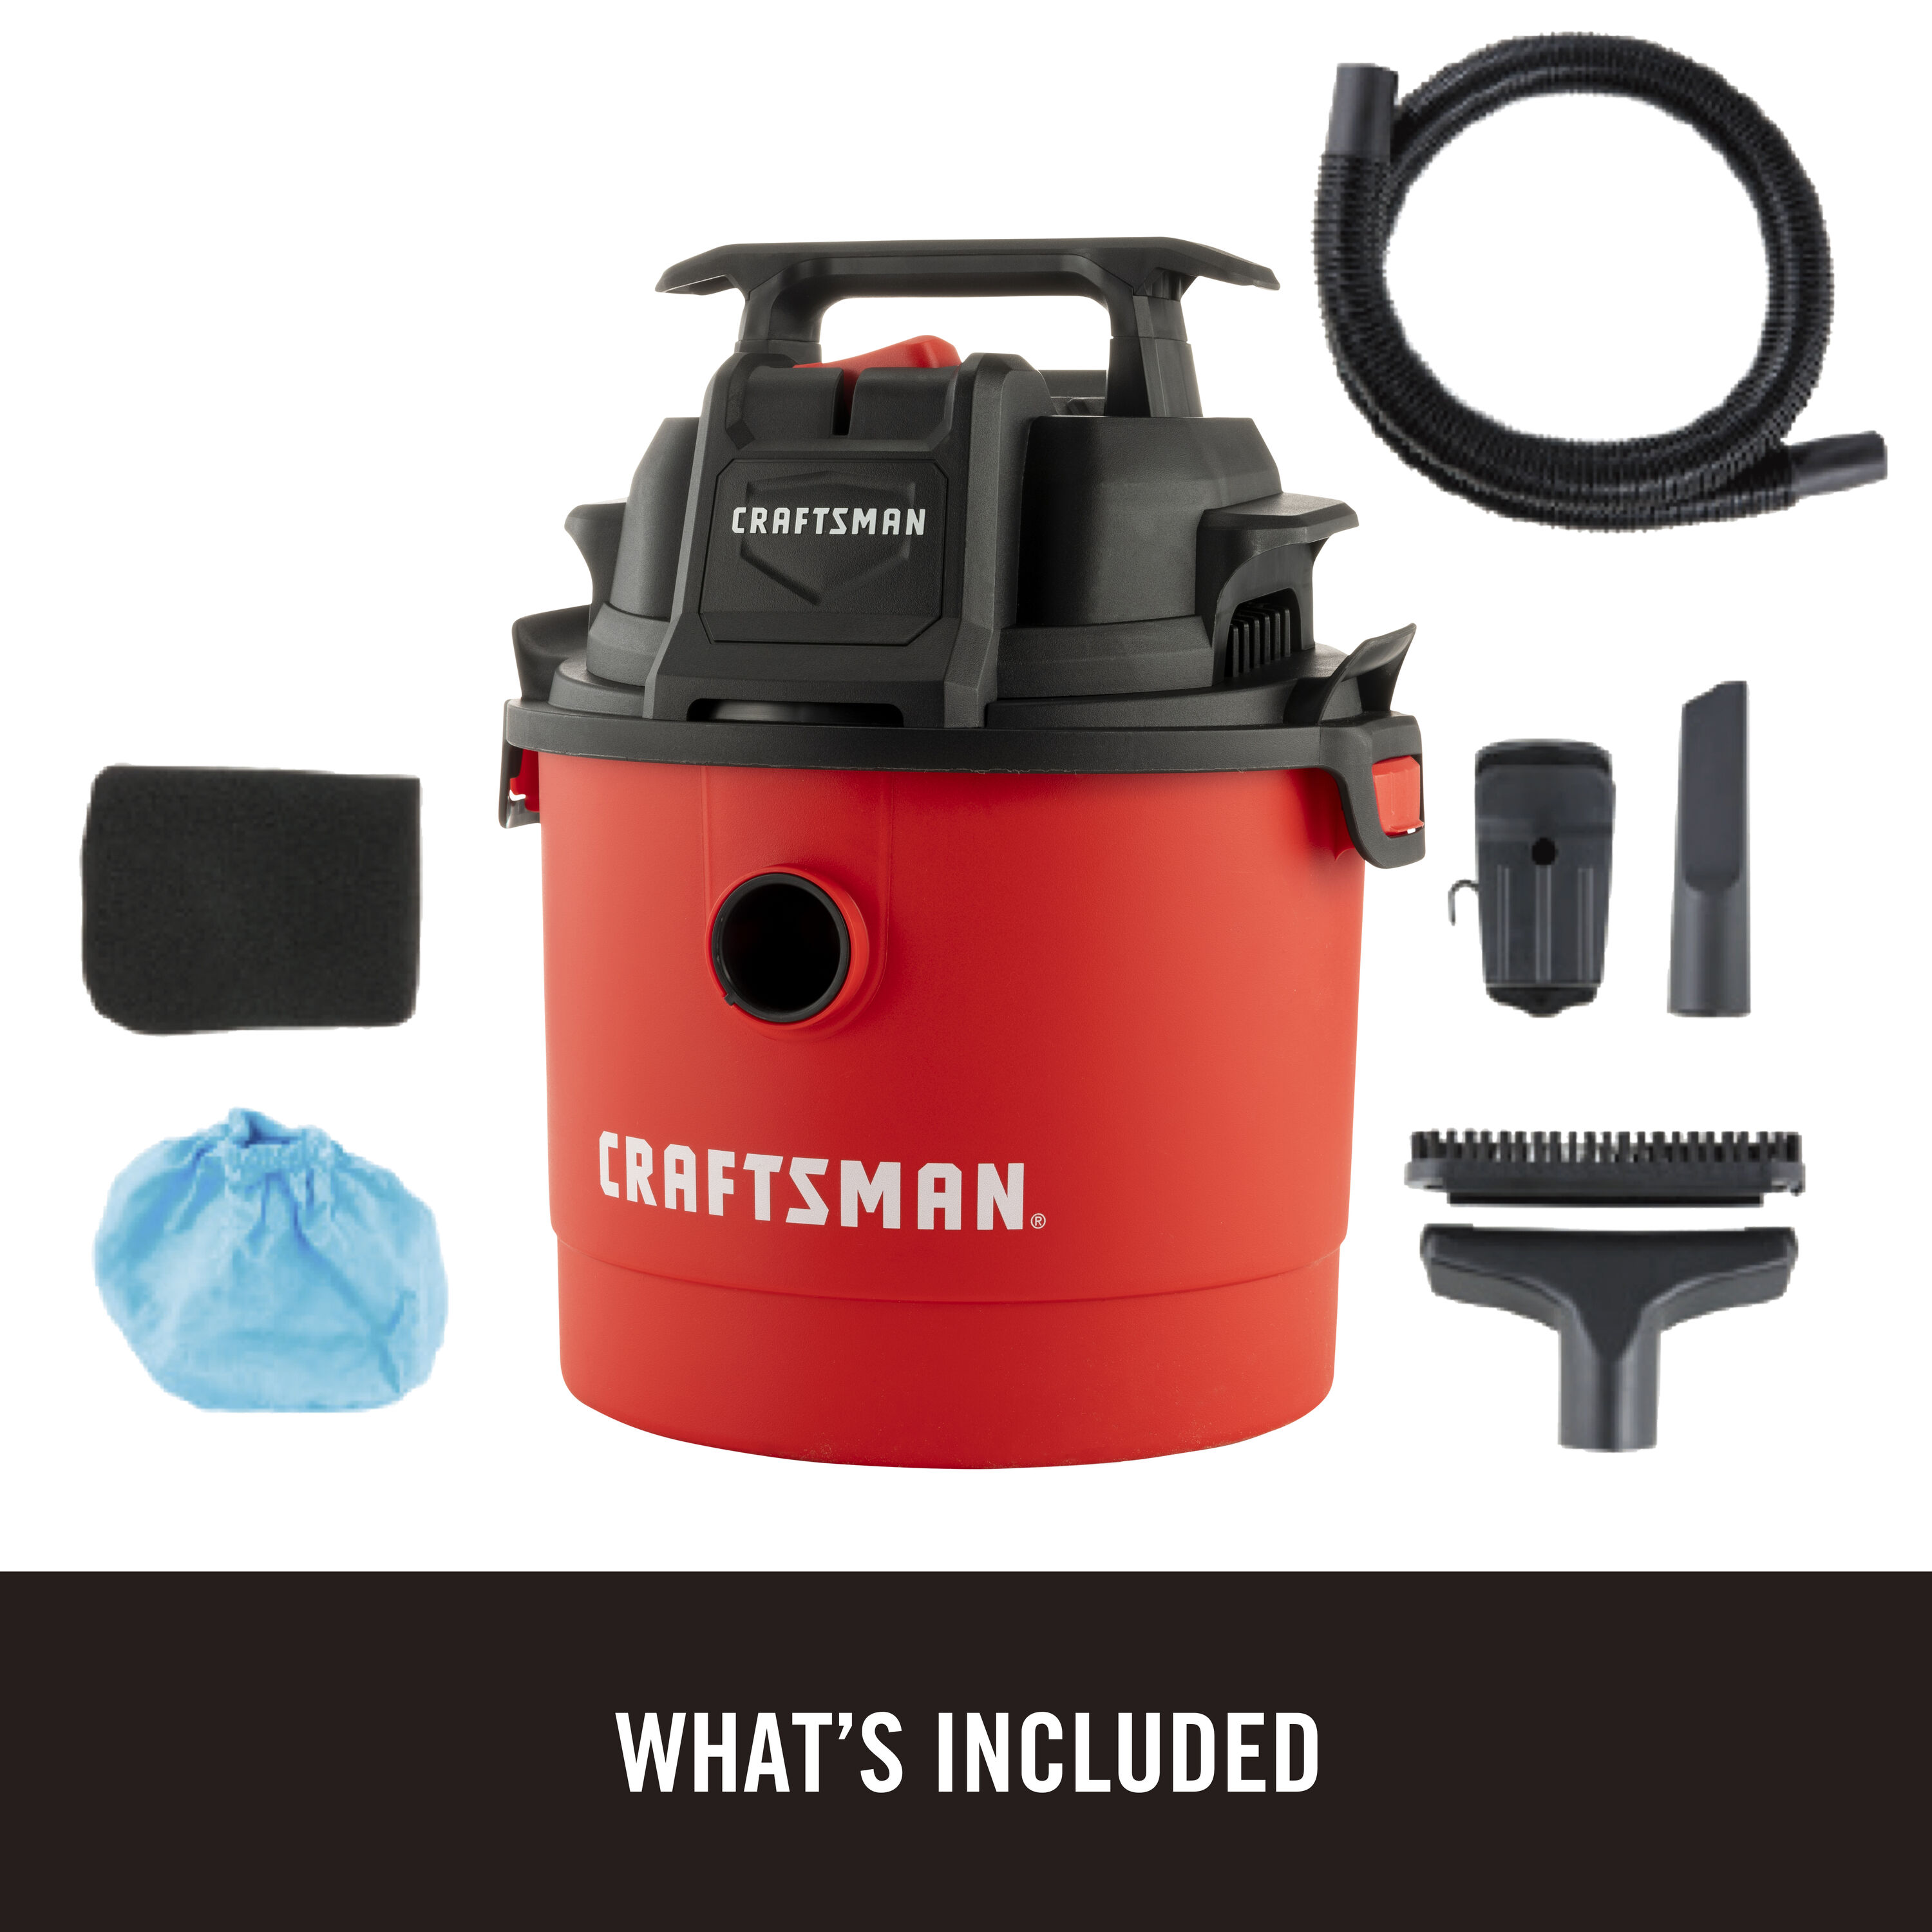 CRAFTSMAN 2.5-Gallons 2-HP Corded Wet/Dry Shop Vacuum with